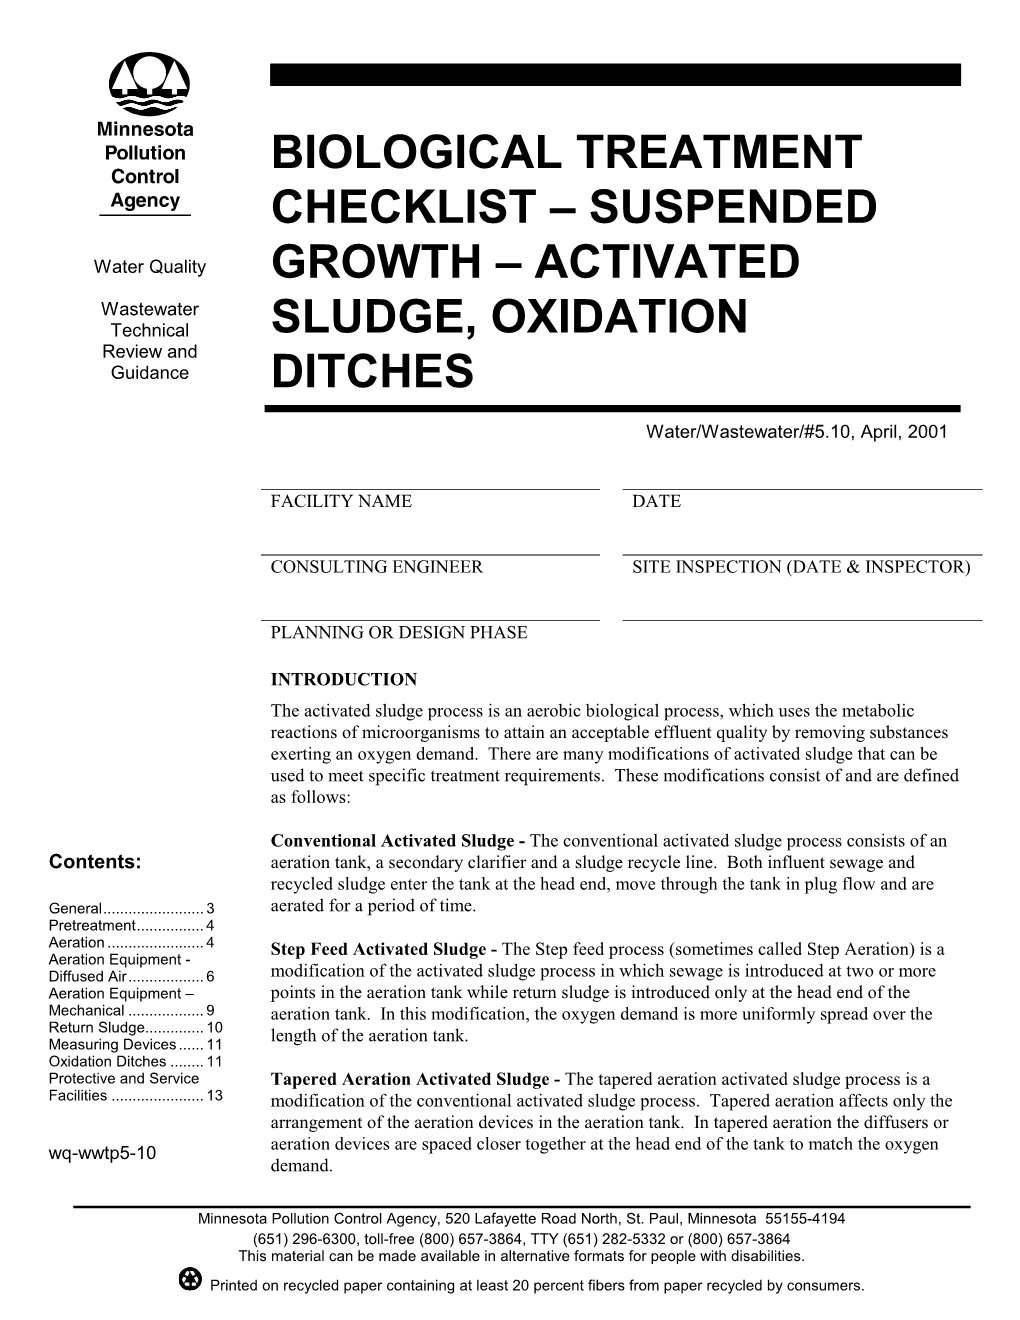 SUSPENDED GROWTH – ACTIVATED SLUDGE, OXIDATION PITCHES Page 2 Water Quality – Wastewater Technical Review and Guidance Water/Wastewater/#5.10, May 2001